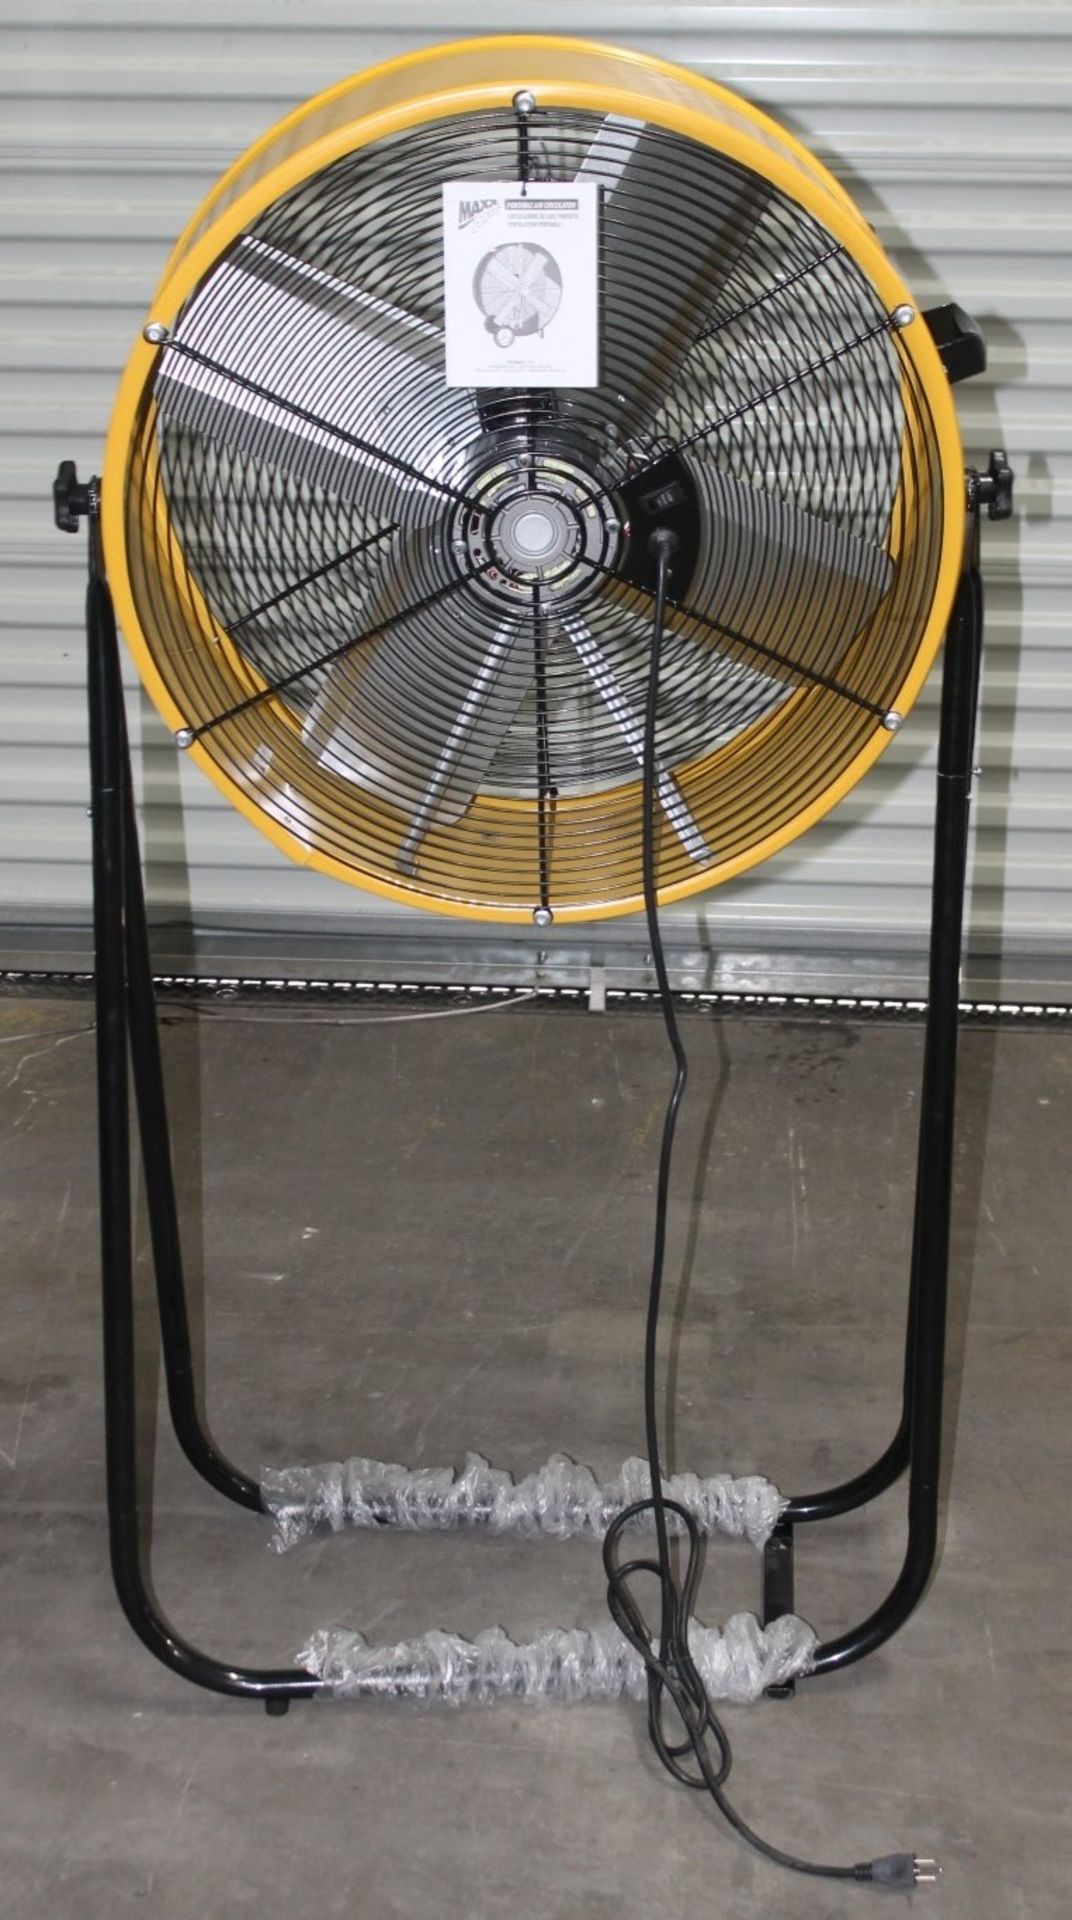 MAX AIR 24" 2 IN 1 TILT FAN, MODEL: BF24TF2N1, CONVERTS FROM A ROLL AROUND FLOOR FAN TO A 52"